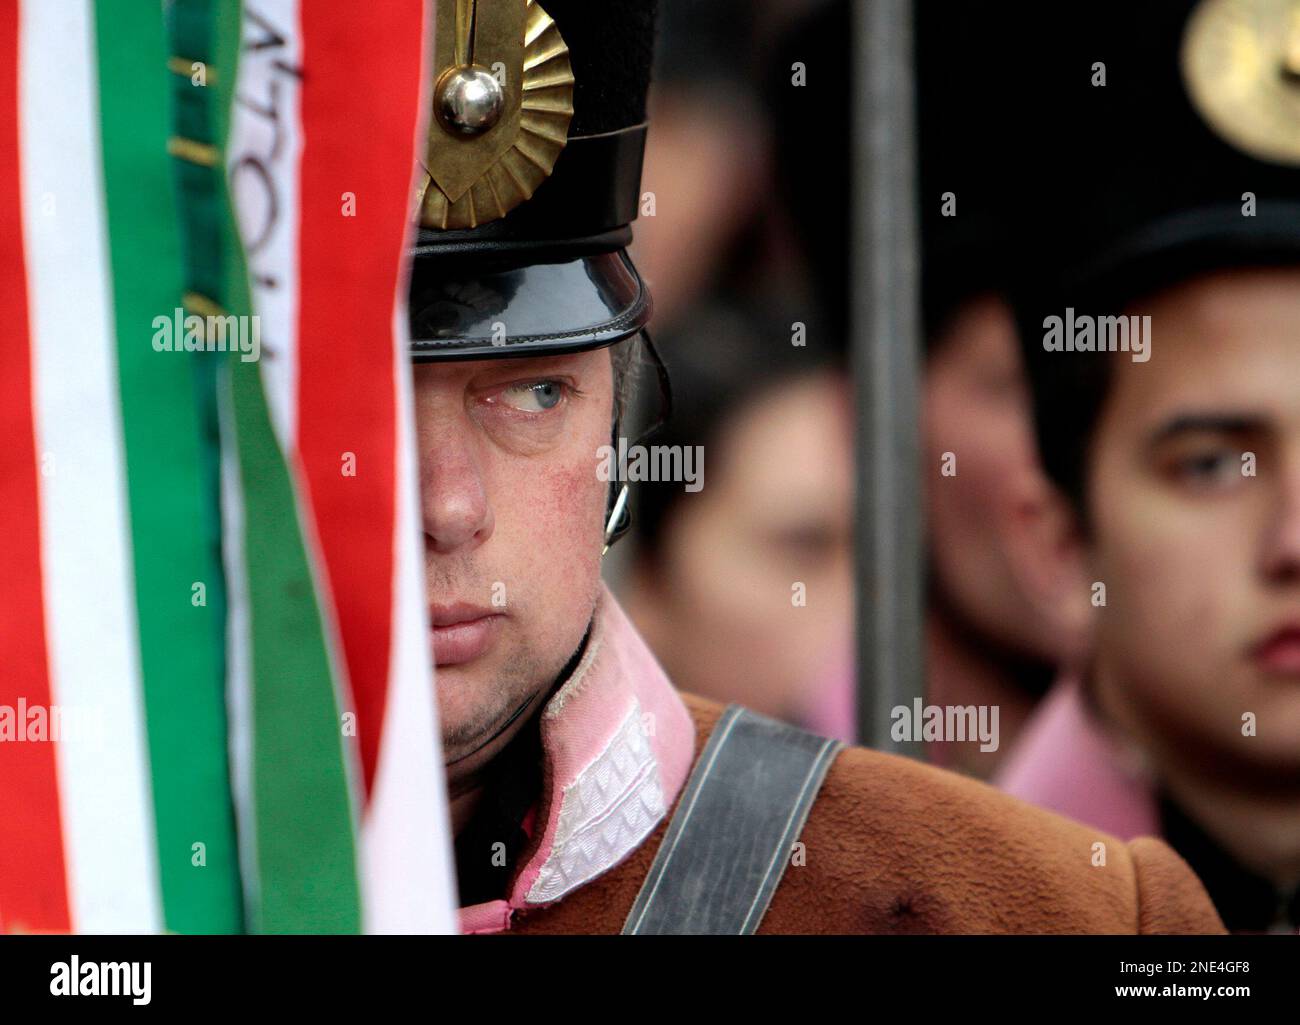 An Ethnic Hungarian man wearing a vintage military uniform seen from behind a flag during celebrations of the anniversary of the 1848 revolution against the Hapsburgs, in Targu Secuiesc, Romania, 250 kilometers north of Bucharest, Monday, March 15, 2010. Thousands of ethnic Hungarians gathered in towns across Romania's Transylvanian region to celebrate the Hungarian holiday. (AP Photo/Vadim Ghirda) Stock Photo